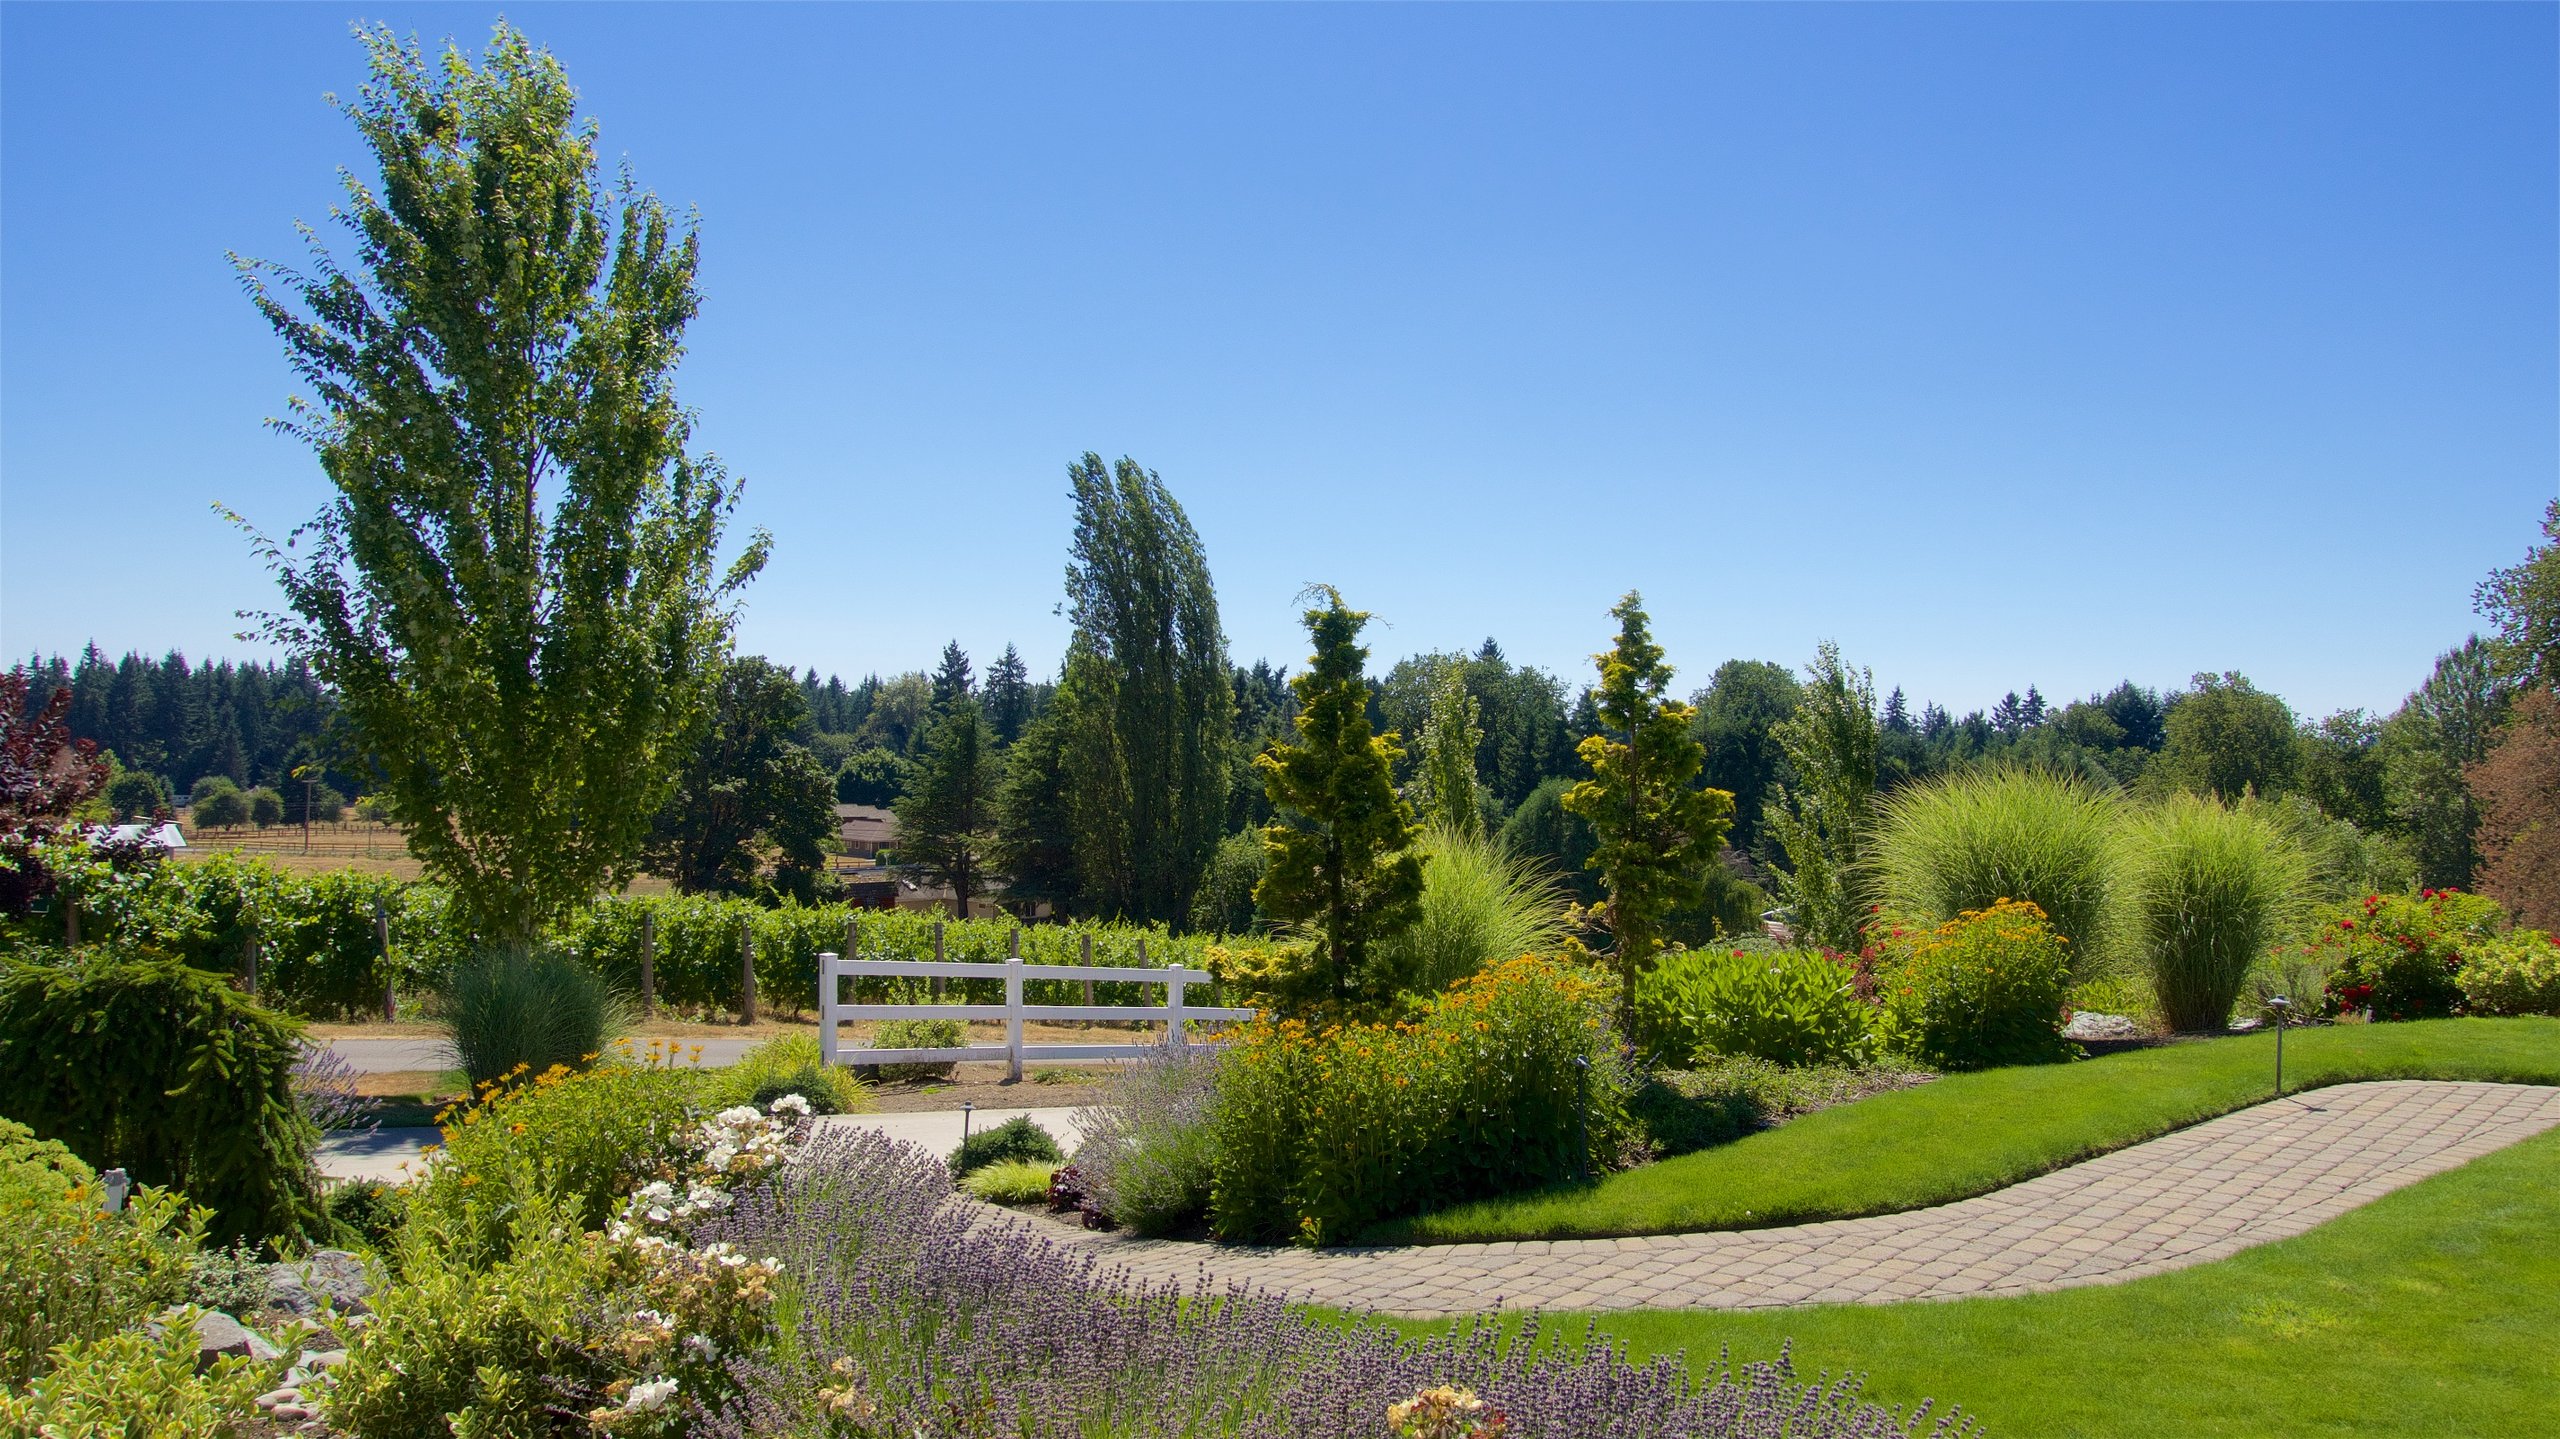 A green field center with benches in Woodinville